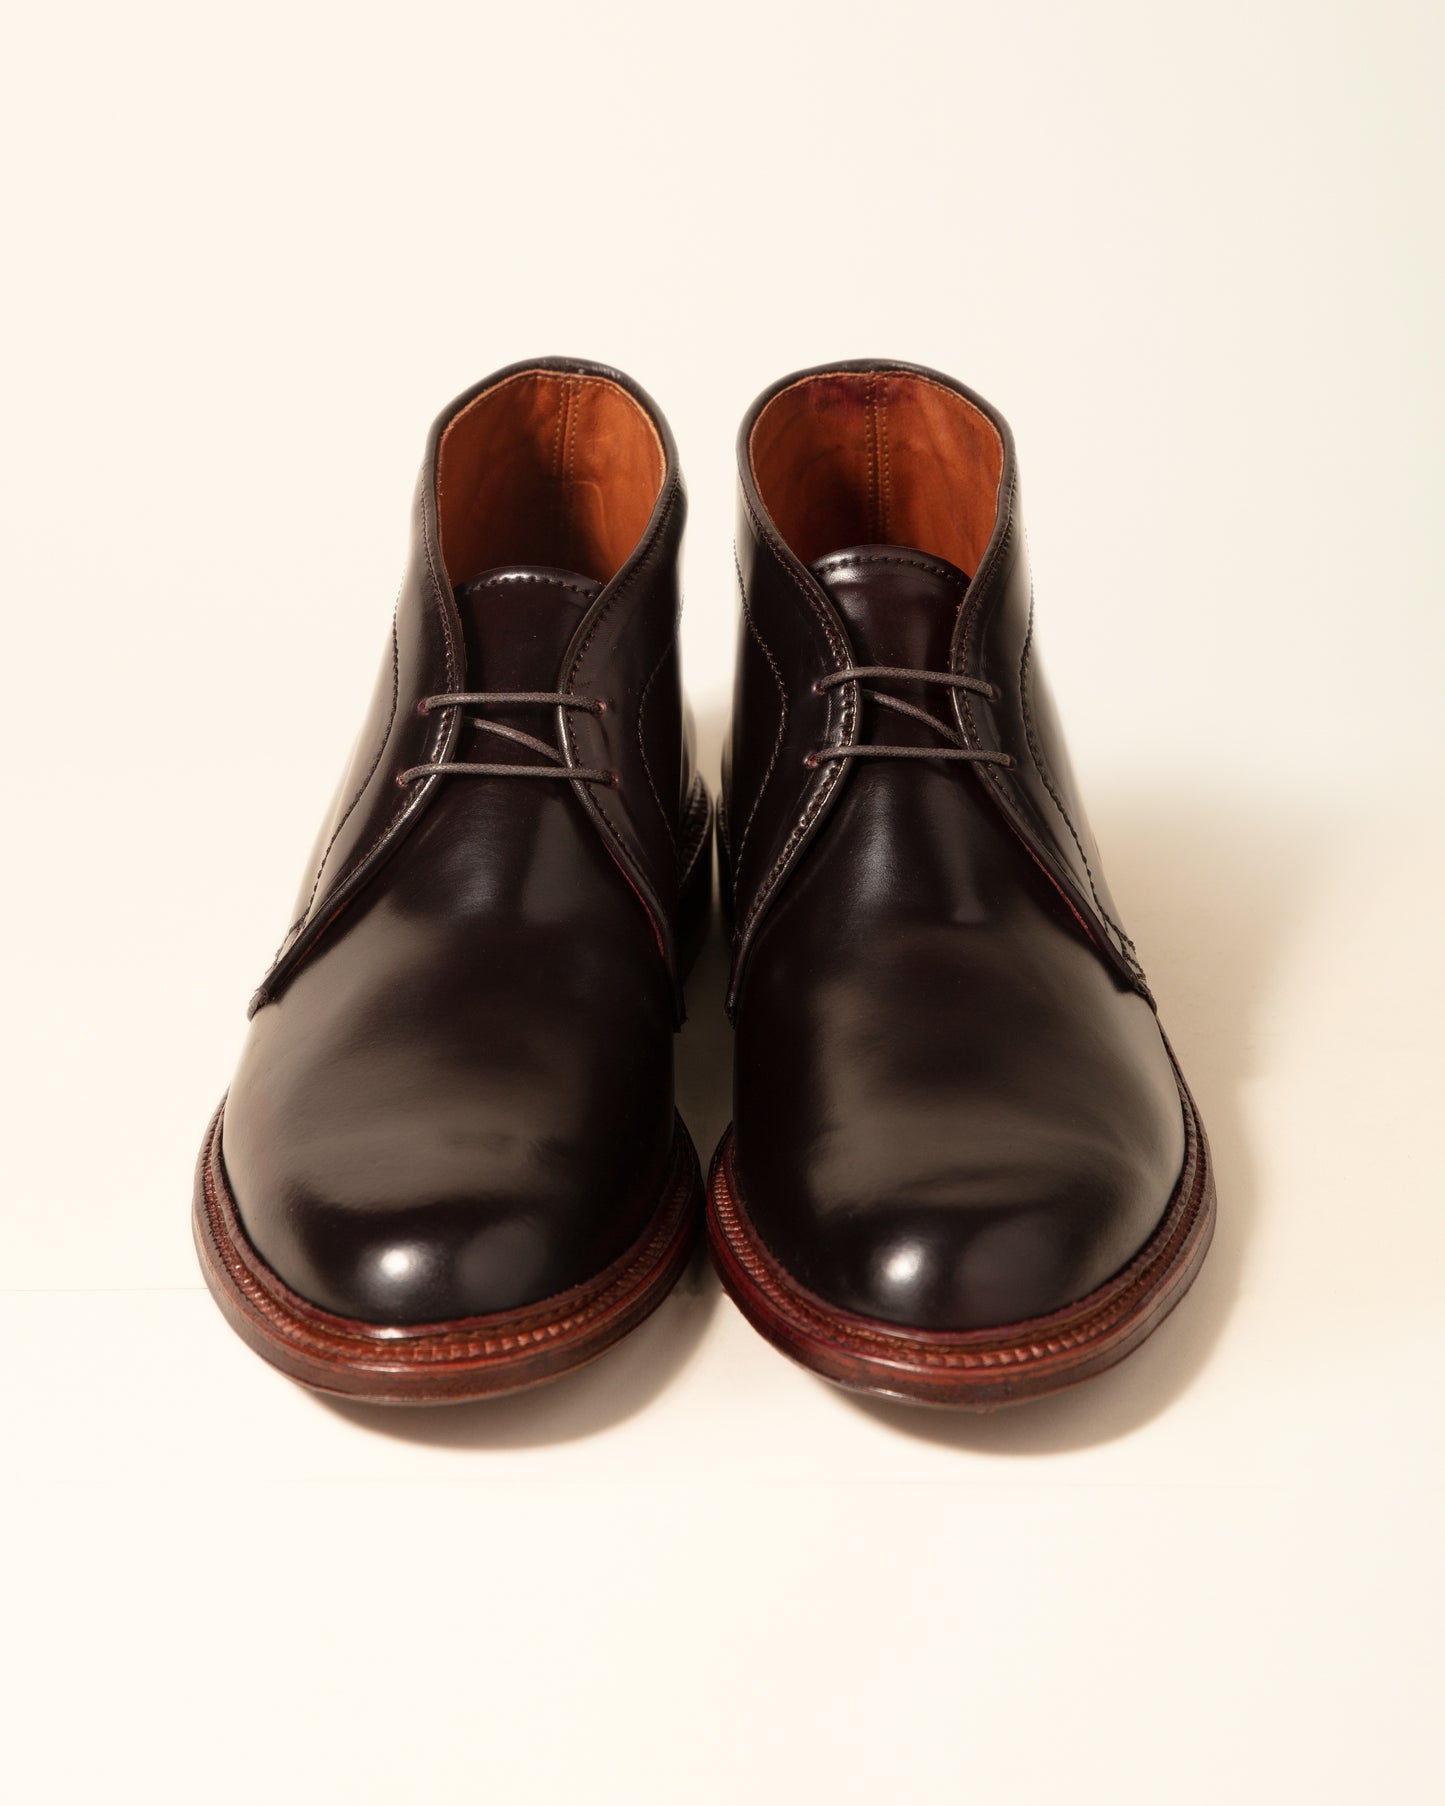 1339A Chukka Boot in Color 8 Shell Cordovan, Barrie Last